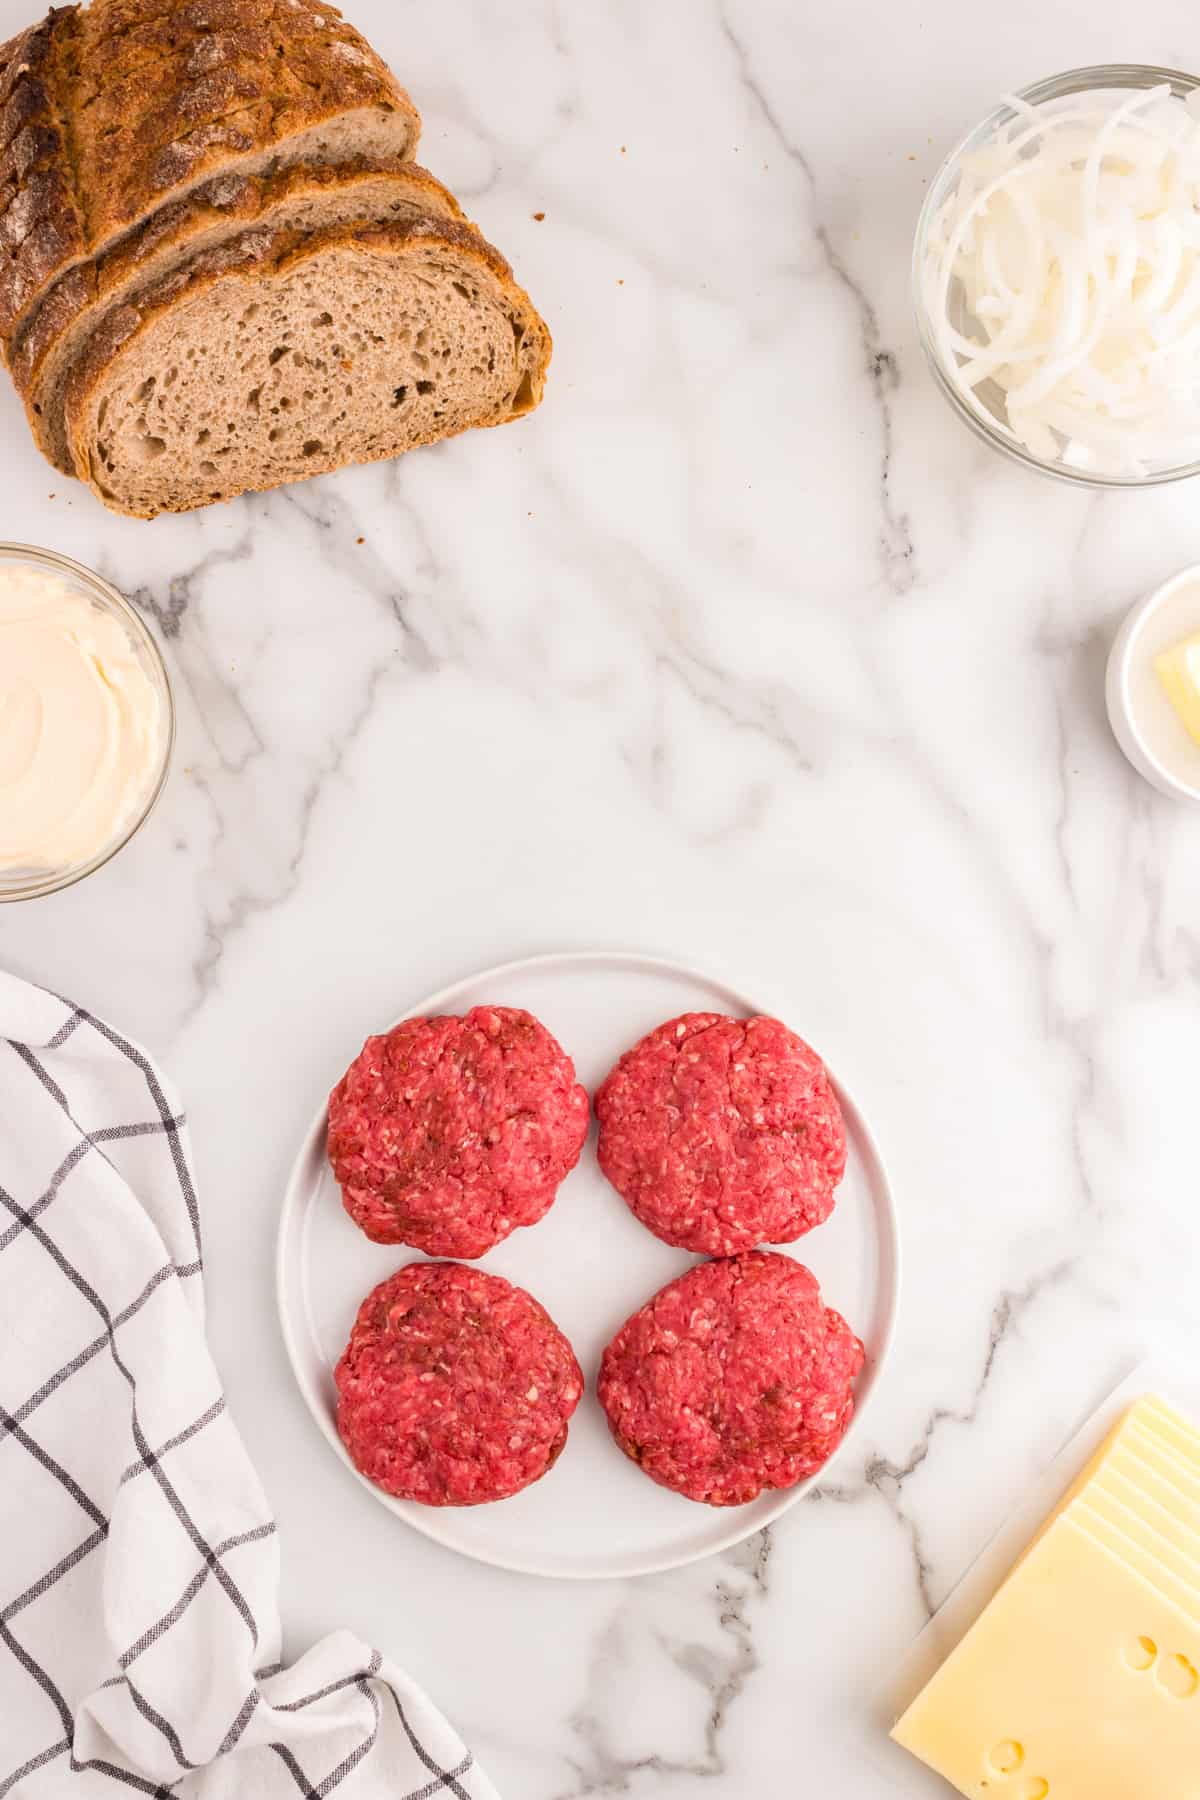 Forming seasoned ground beef into patties for Patty Melt recipe